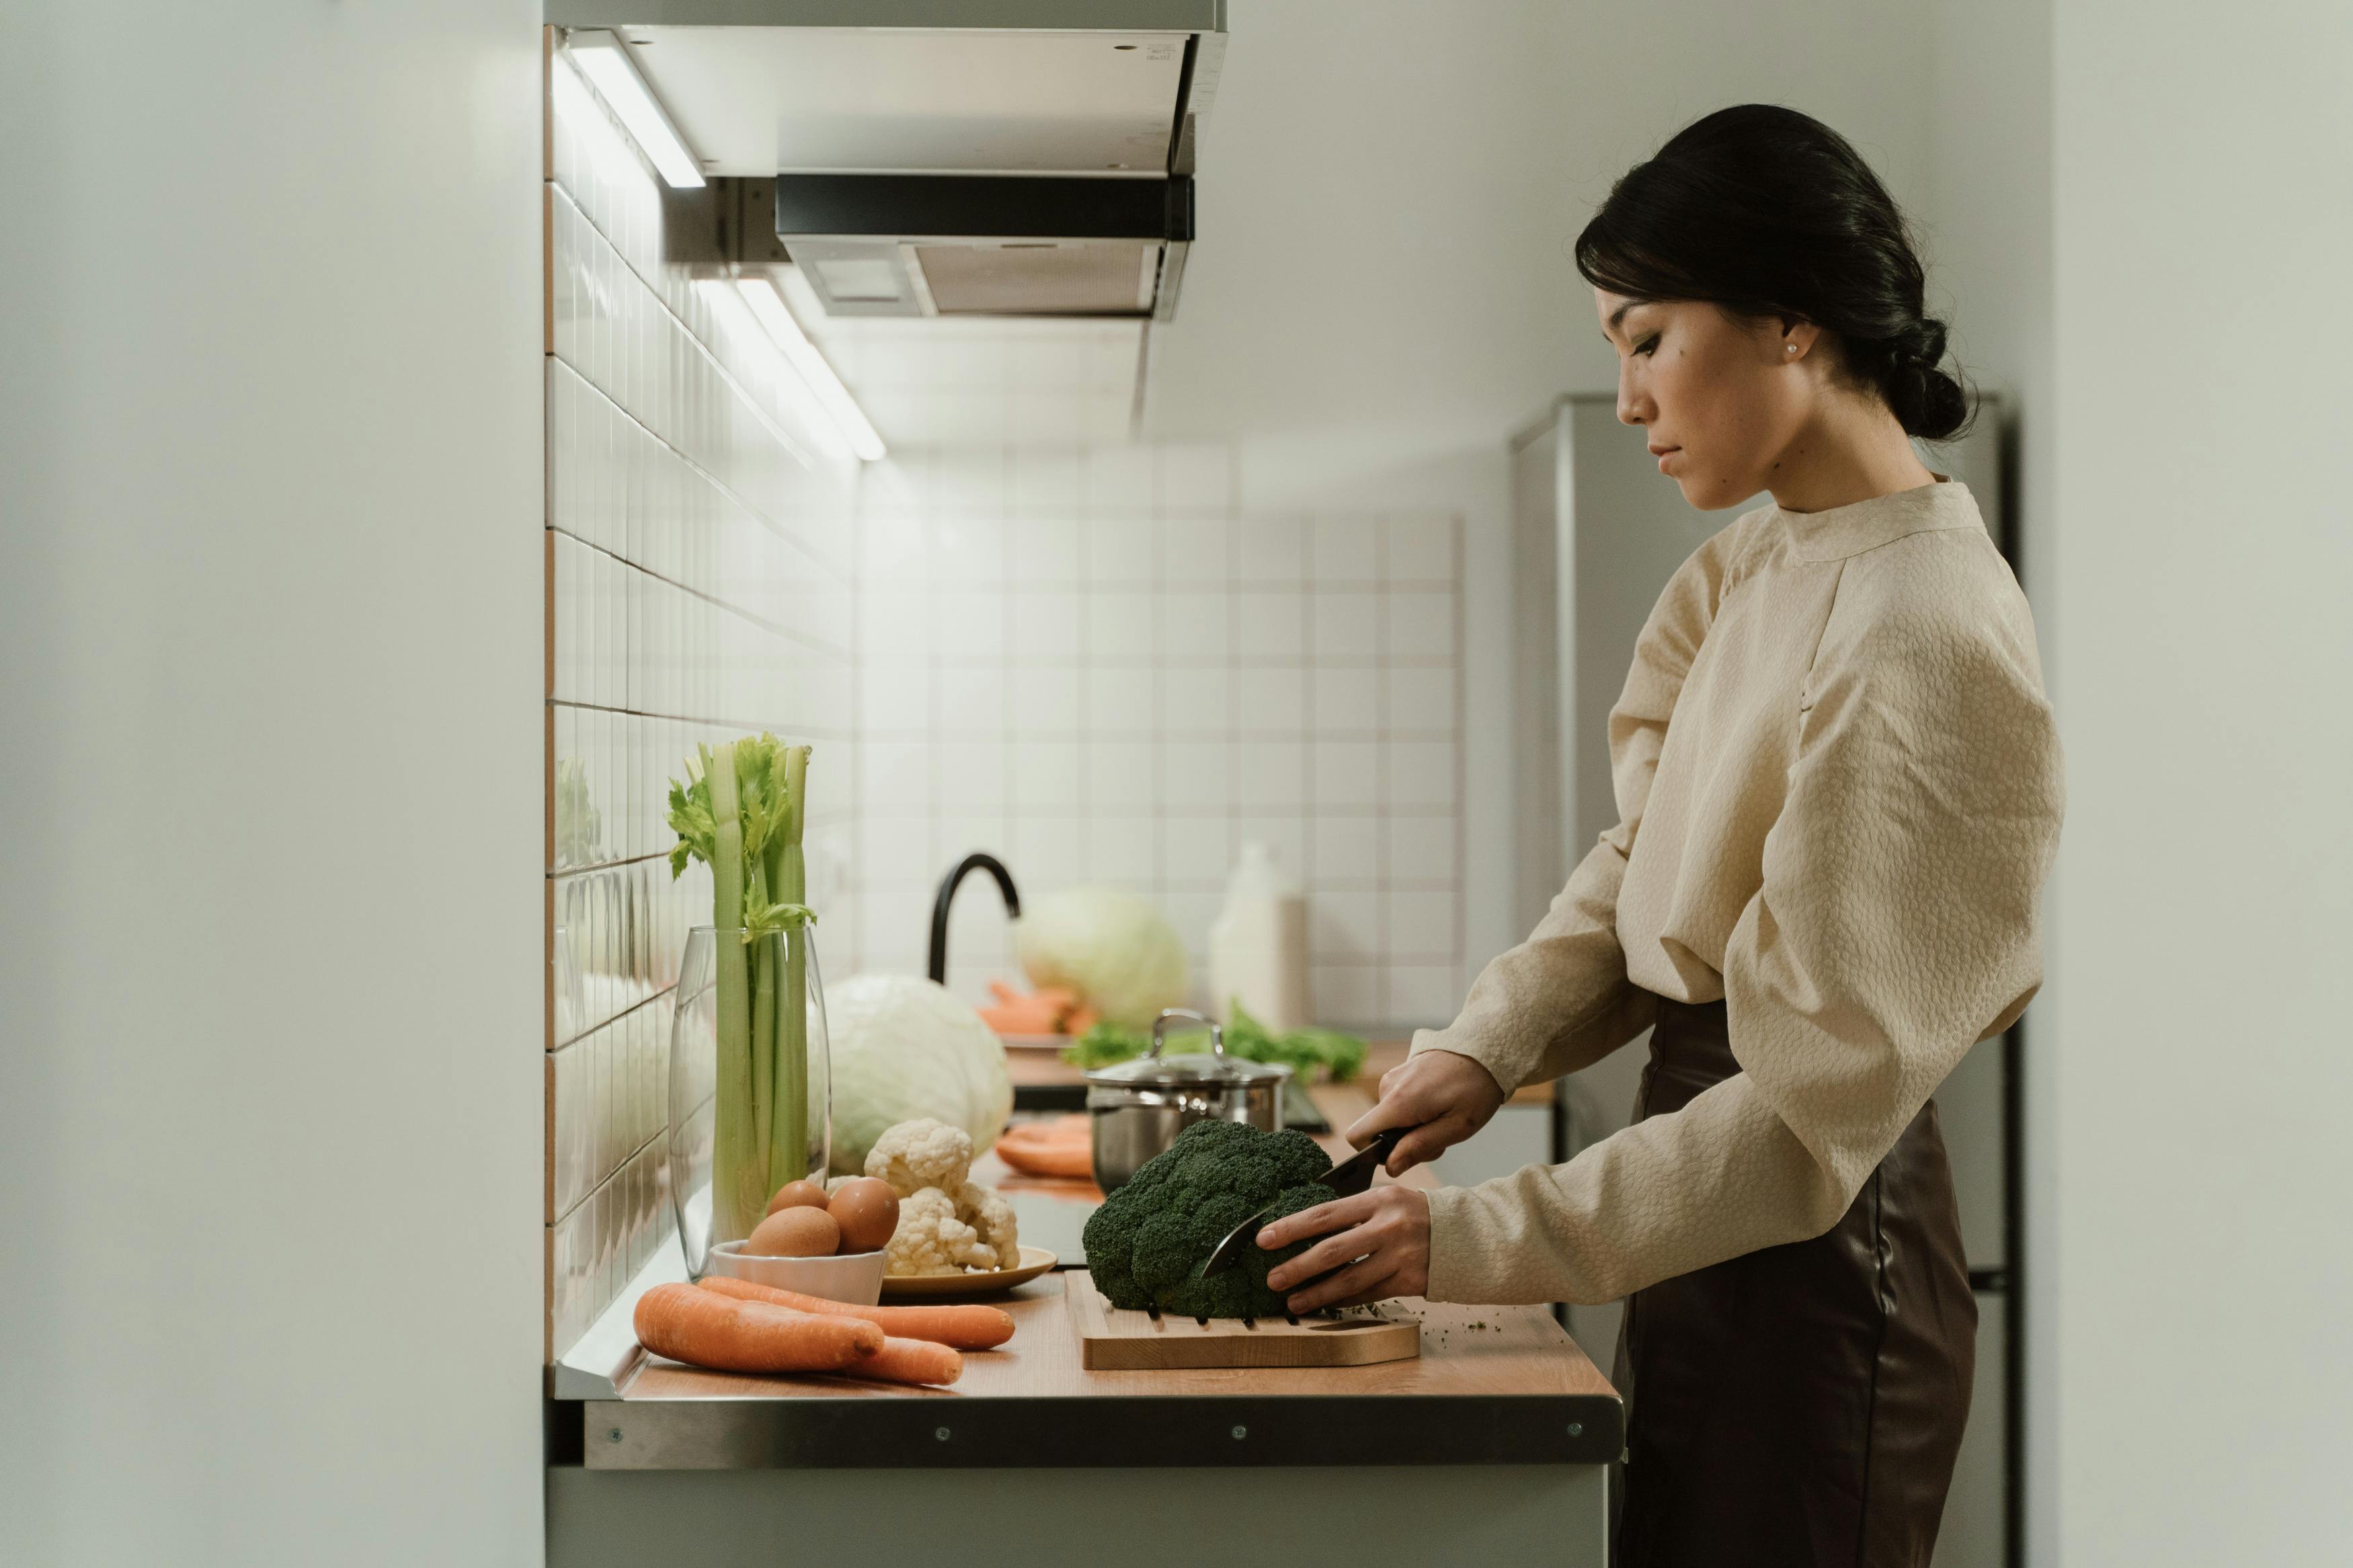 A woman cutting vegetables. For illustration purposes only | Source: Pexels